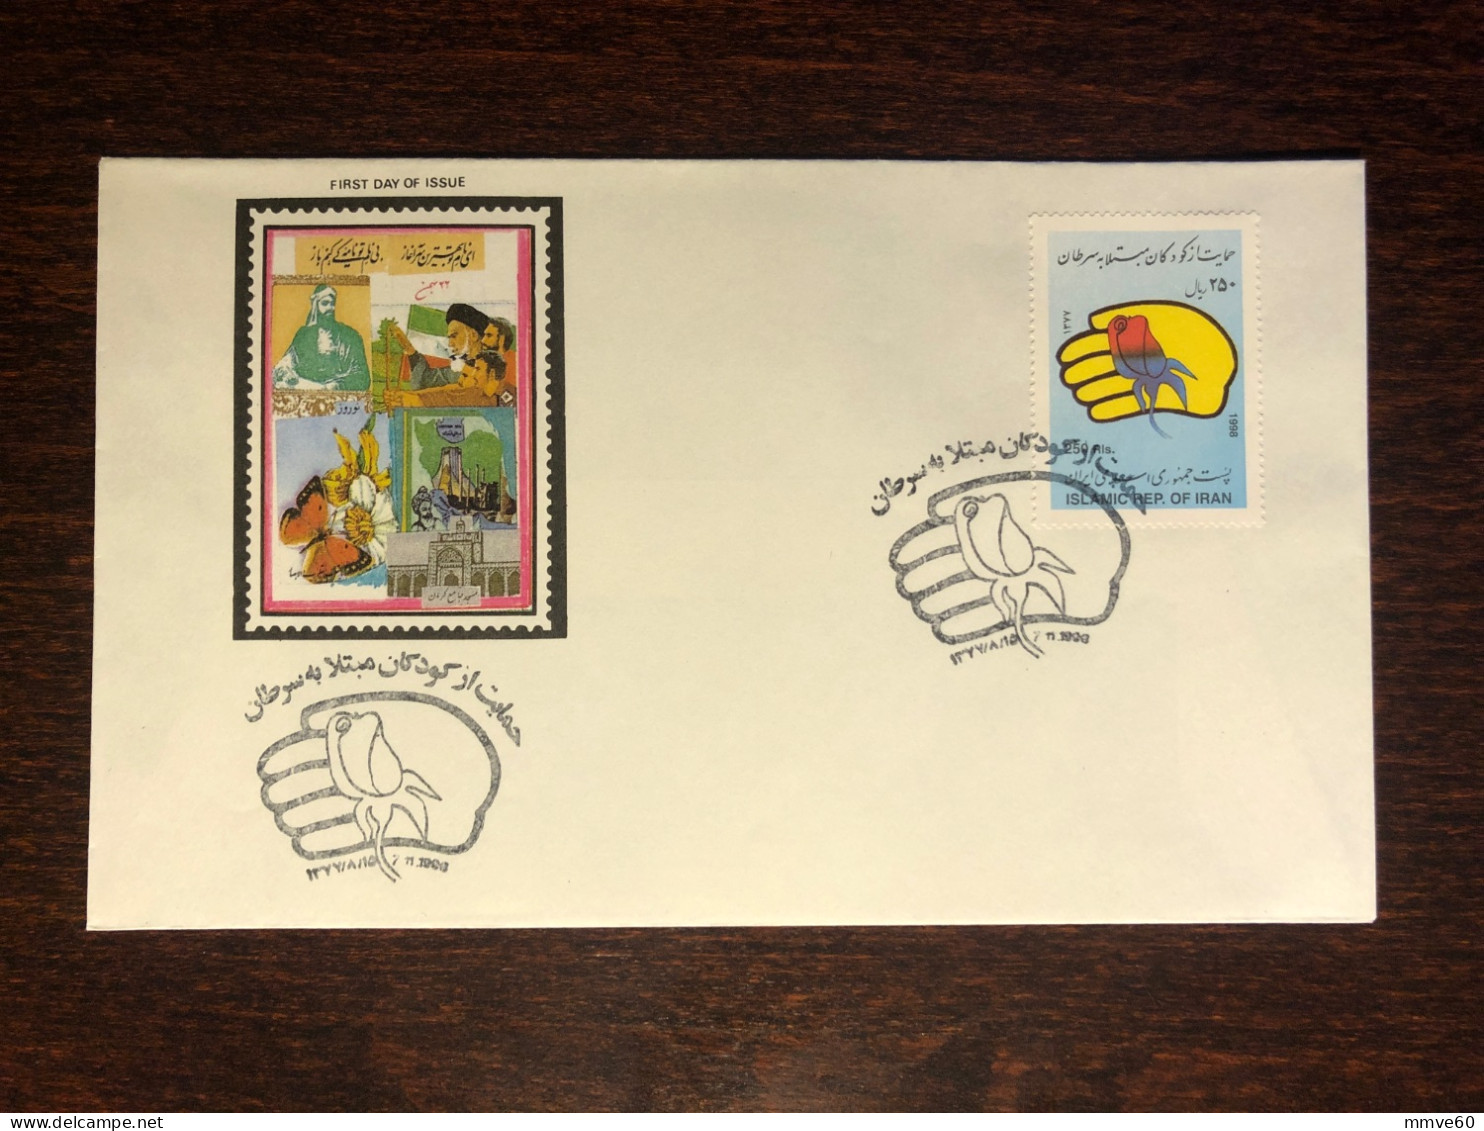 IRAN FDC COVER 1998 YEAR CANCER ONCOLOGY HEALTH MEDICINE STAMPS - Iran